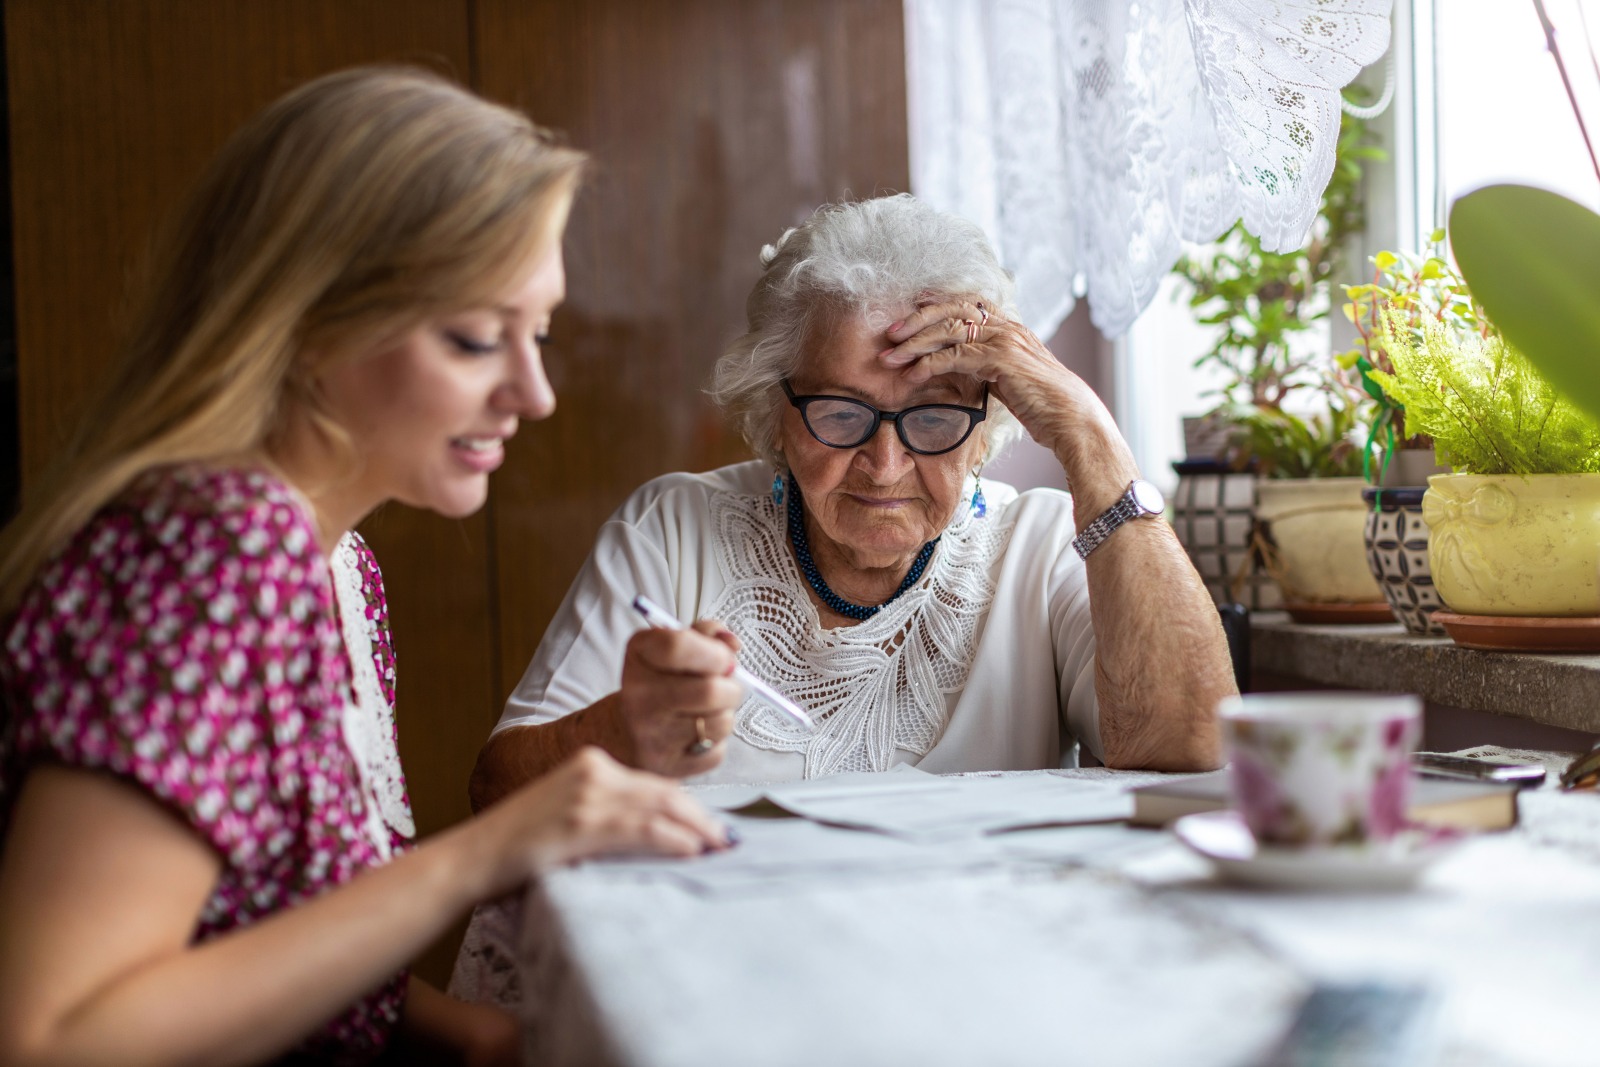 How to Protect the Elderly From Fraud & Financial Exploitation